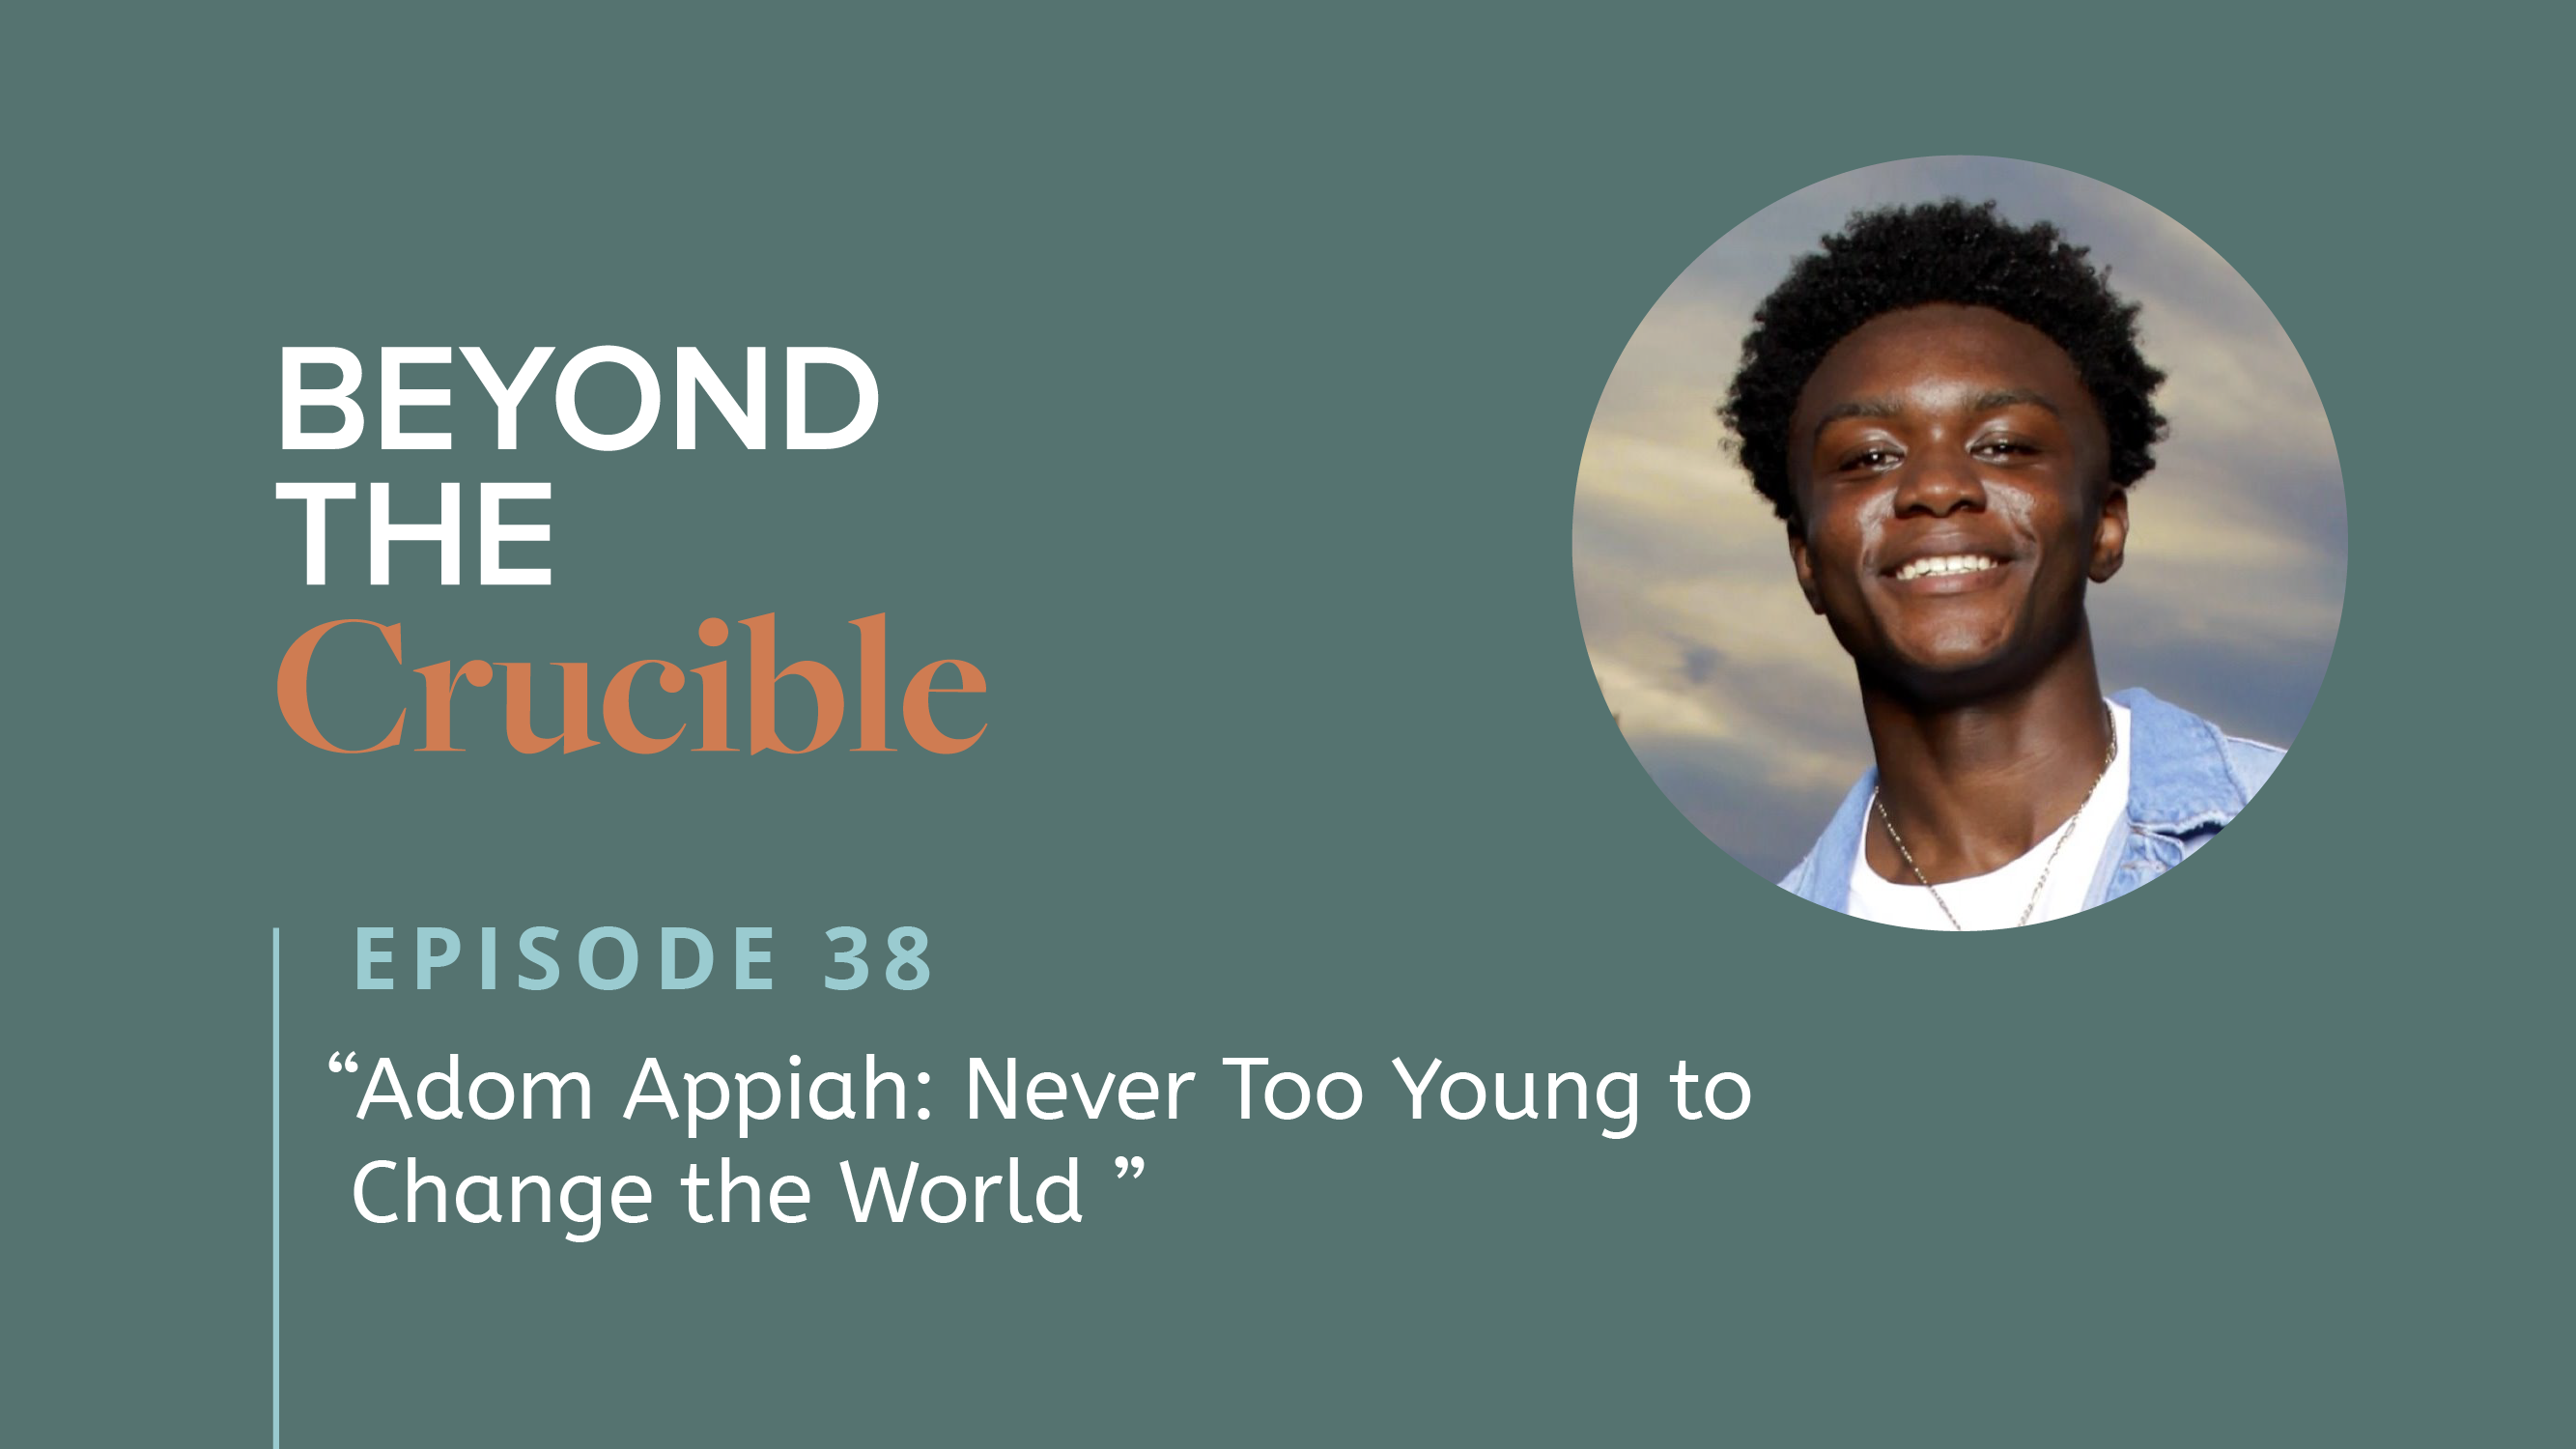 Adom Appiah: Never Too Young to Change the World #38